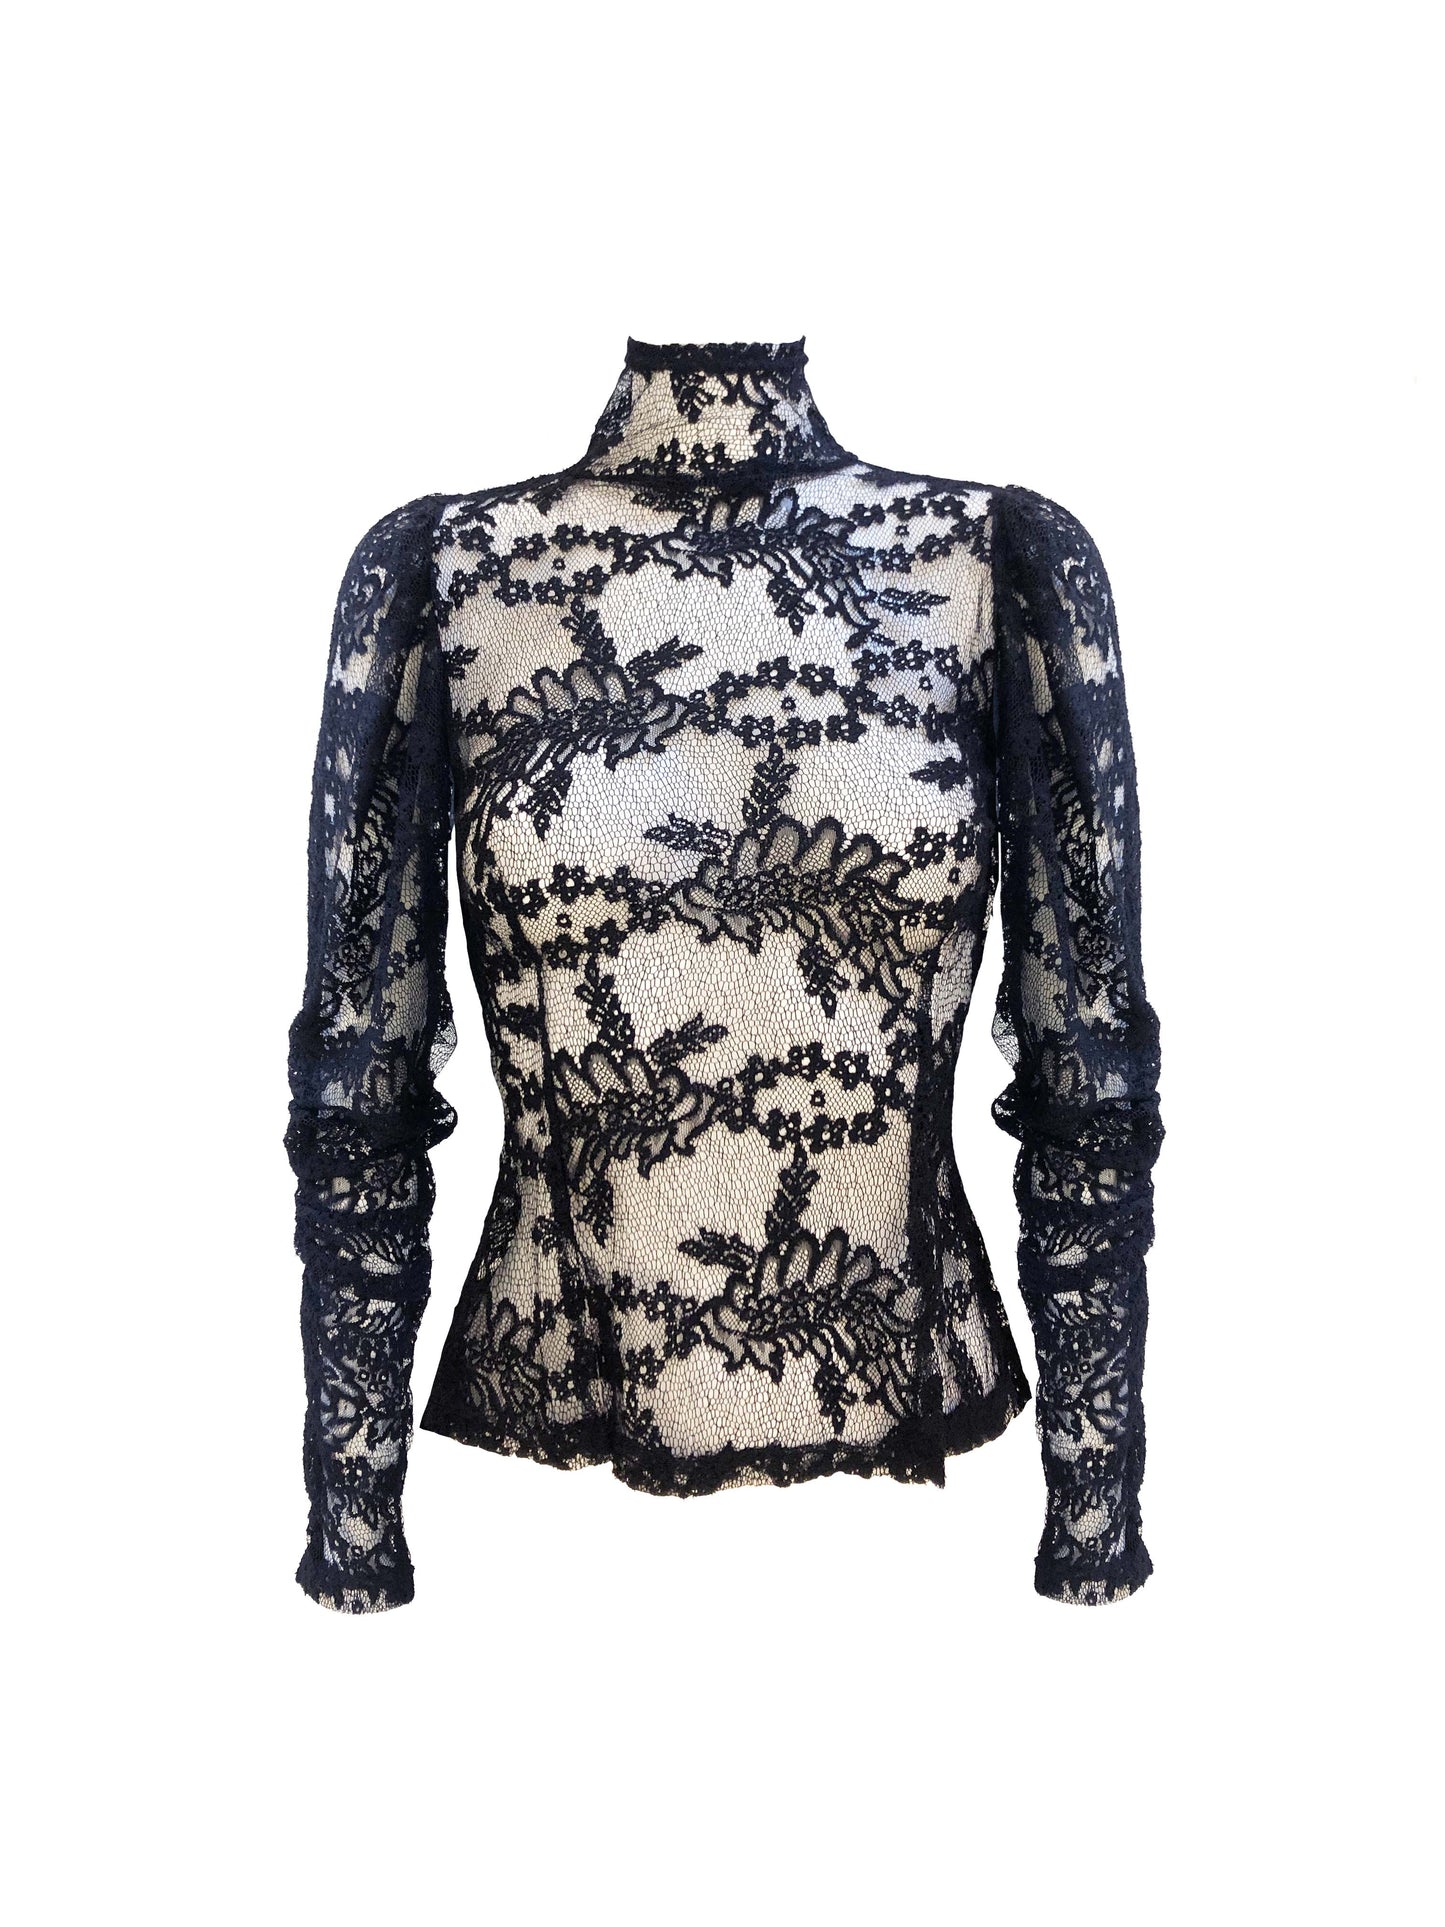 The Victorian Top in Lace